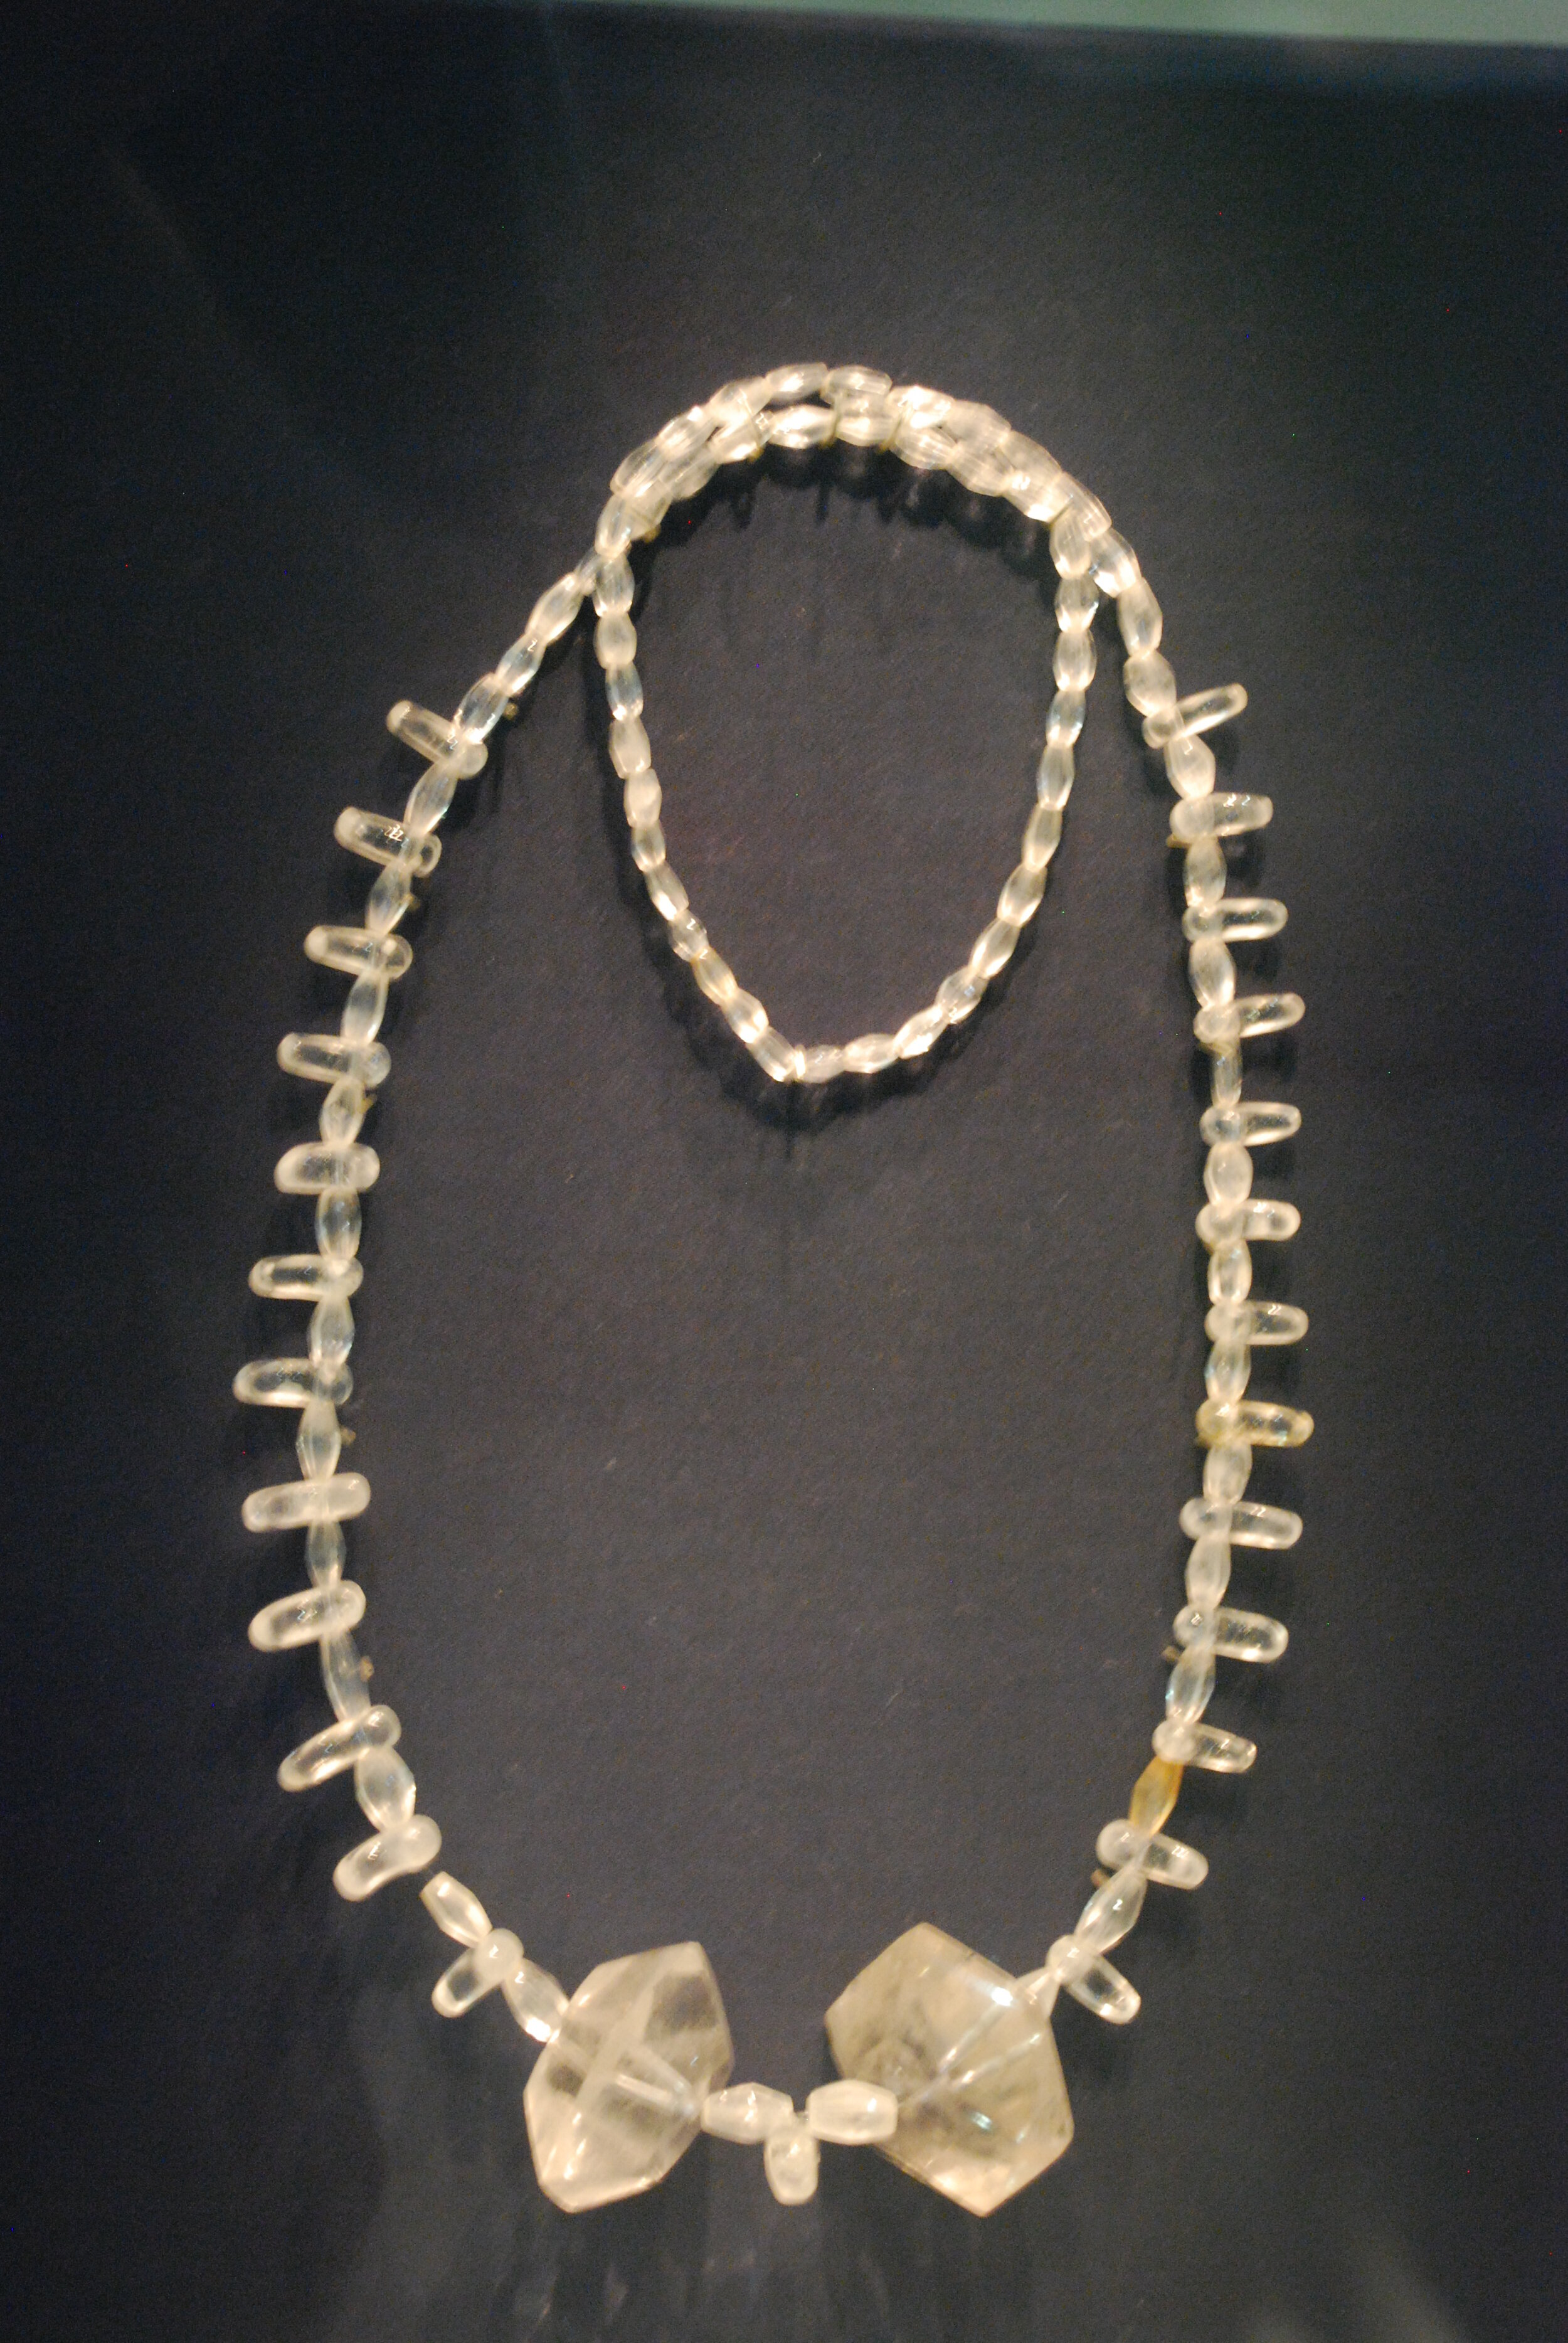 Crystal and Jade Necklace (Silla)